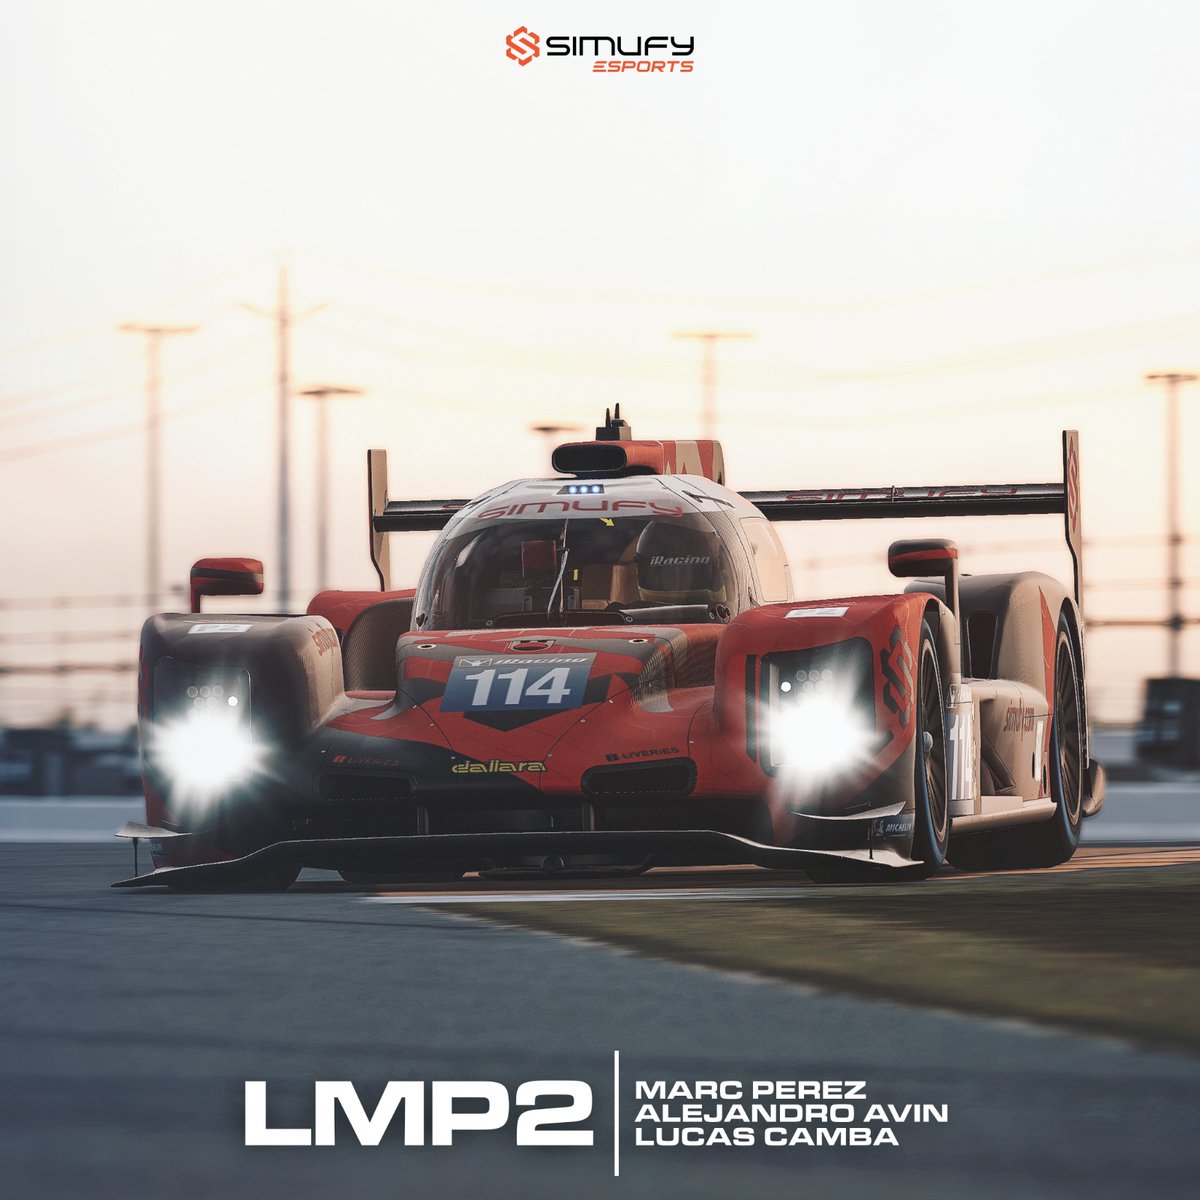 Our GTD and LMP2 lineup for the @iRacing 24H Daytona powered by @vcoesports !

⏰ from 13:25 CET
📺twitch.tv/vcoesports
⏱️ timing at timing.racespot.tv

Make it a race to remember! 💪

#wearesimufy #vcoesports #vcograndslam #simufy #daytona24